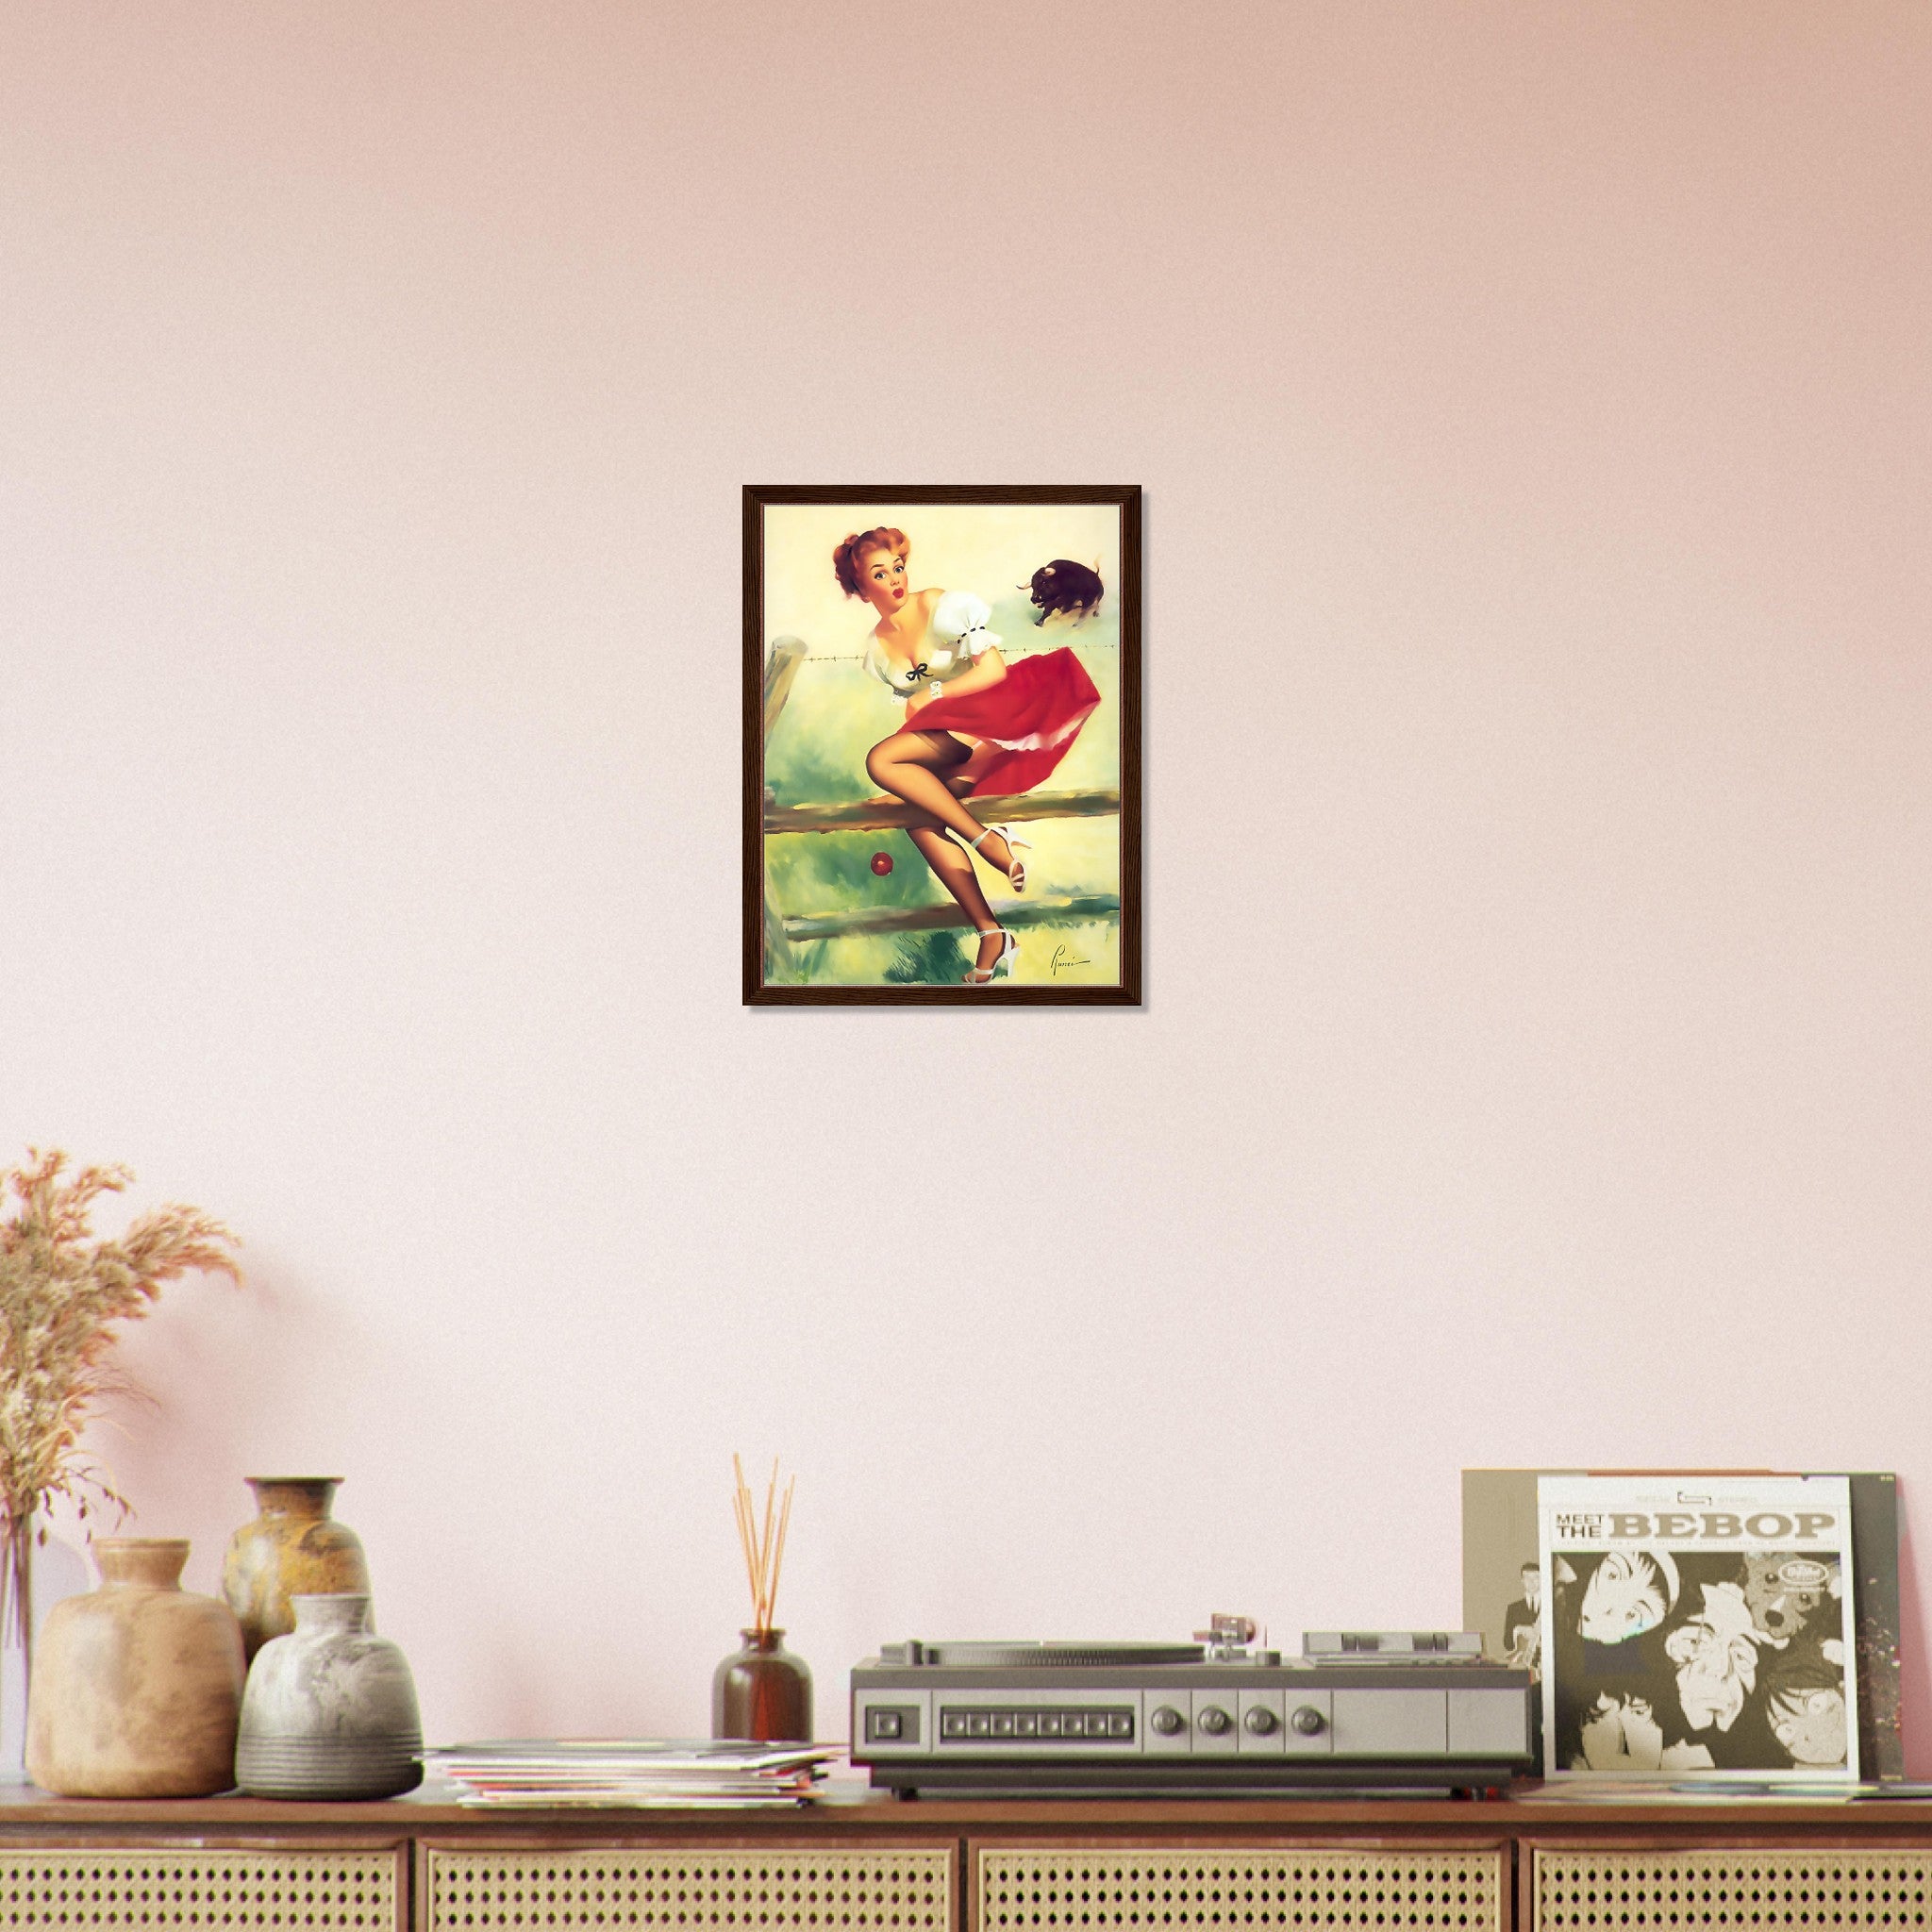 Pin Up Girl Framed, Vintage Pin Up  - The Escape - Retro Pin Up Girl Framed Print-  Edward Runci,  - Late 1940'S - 1950'S